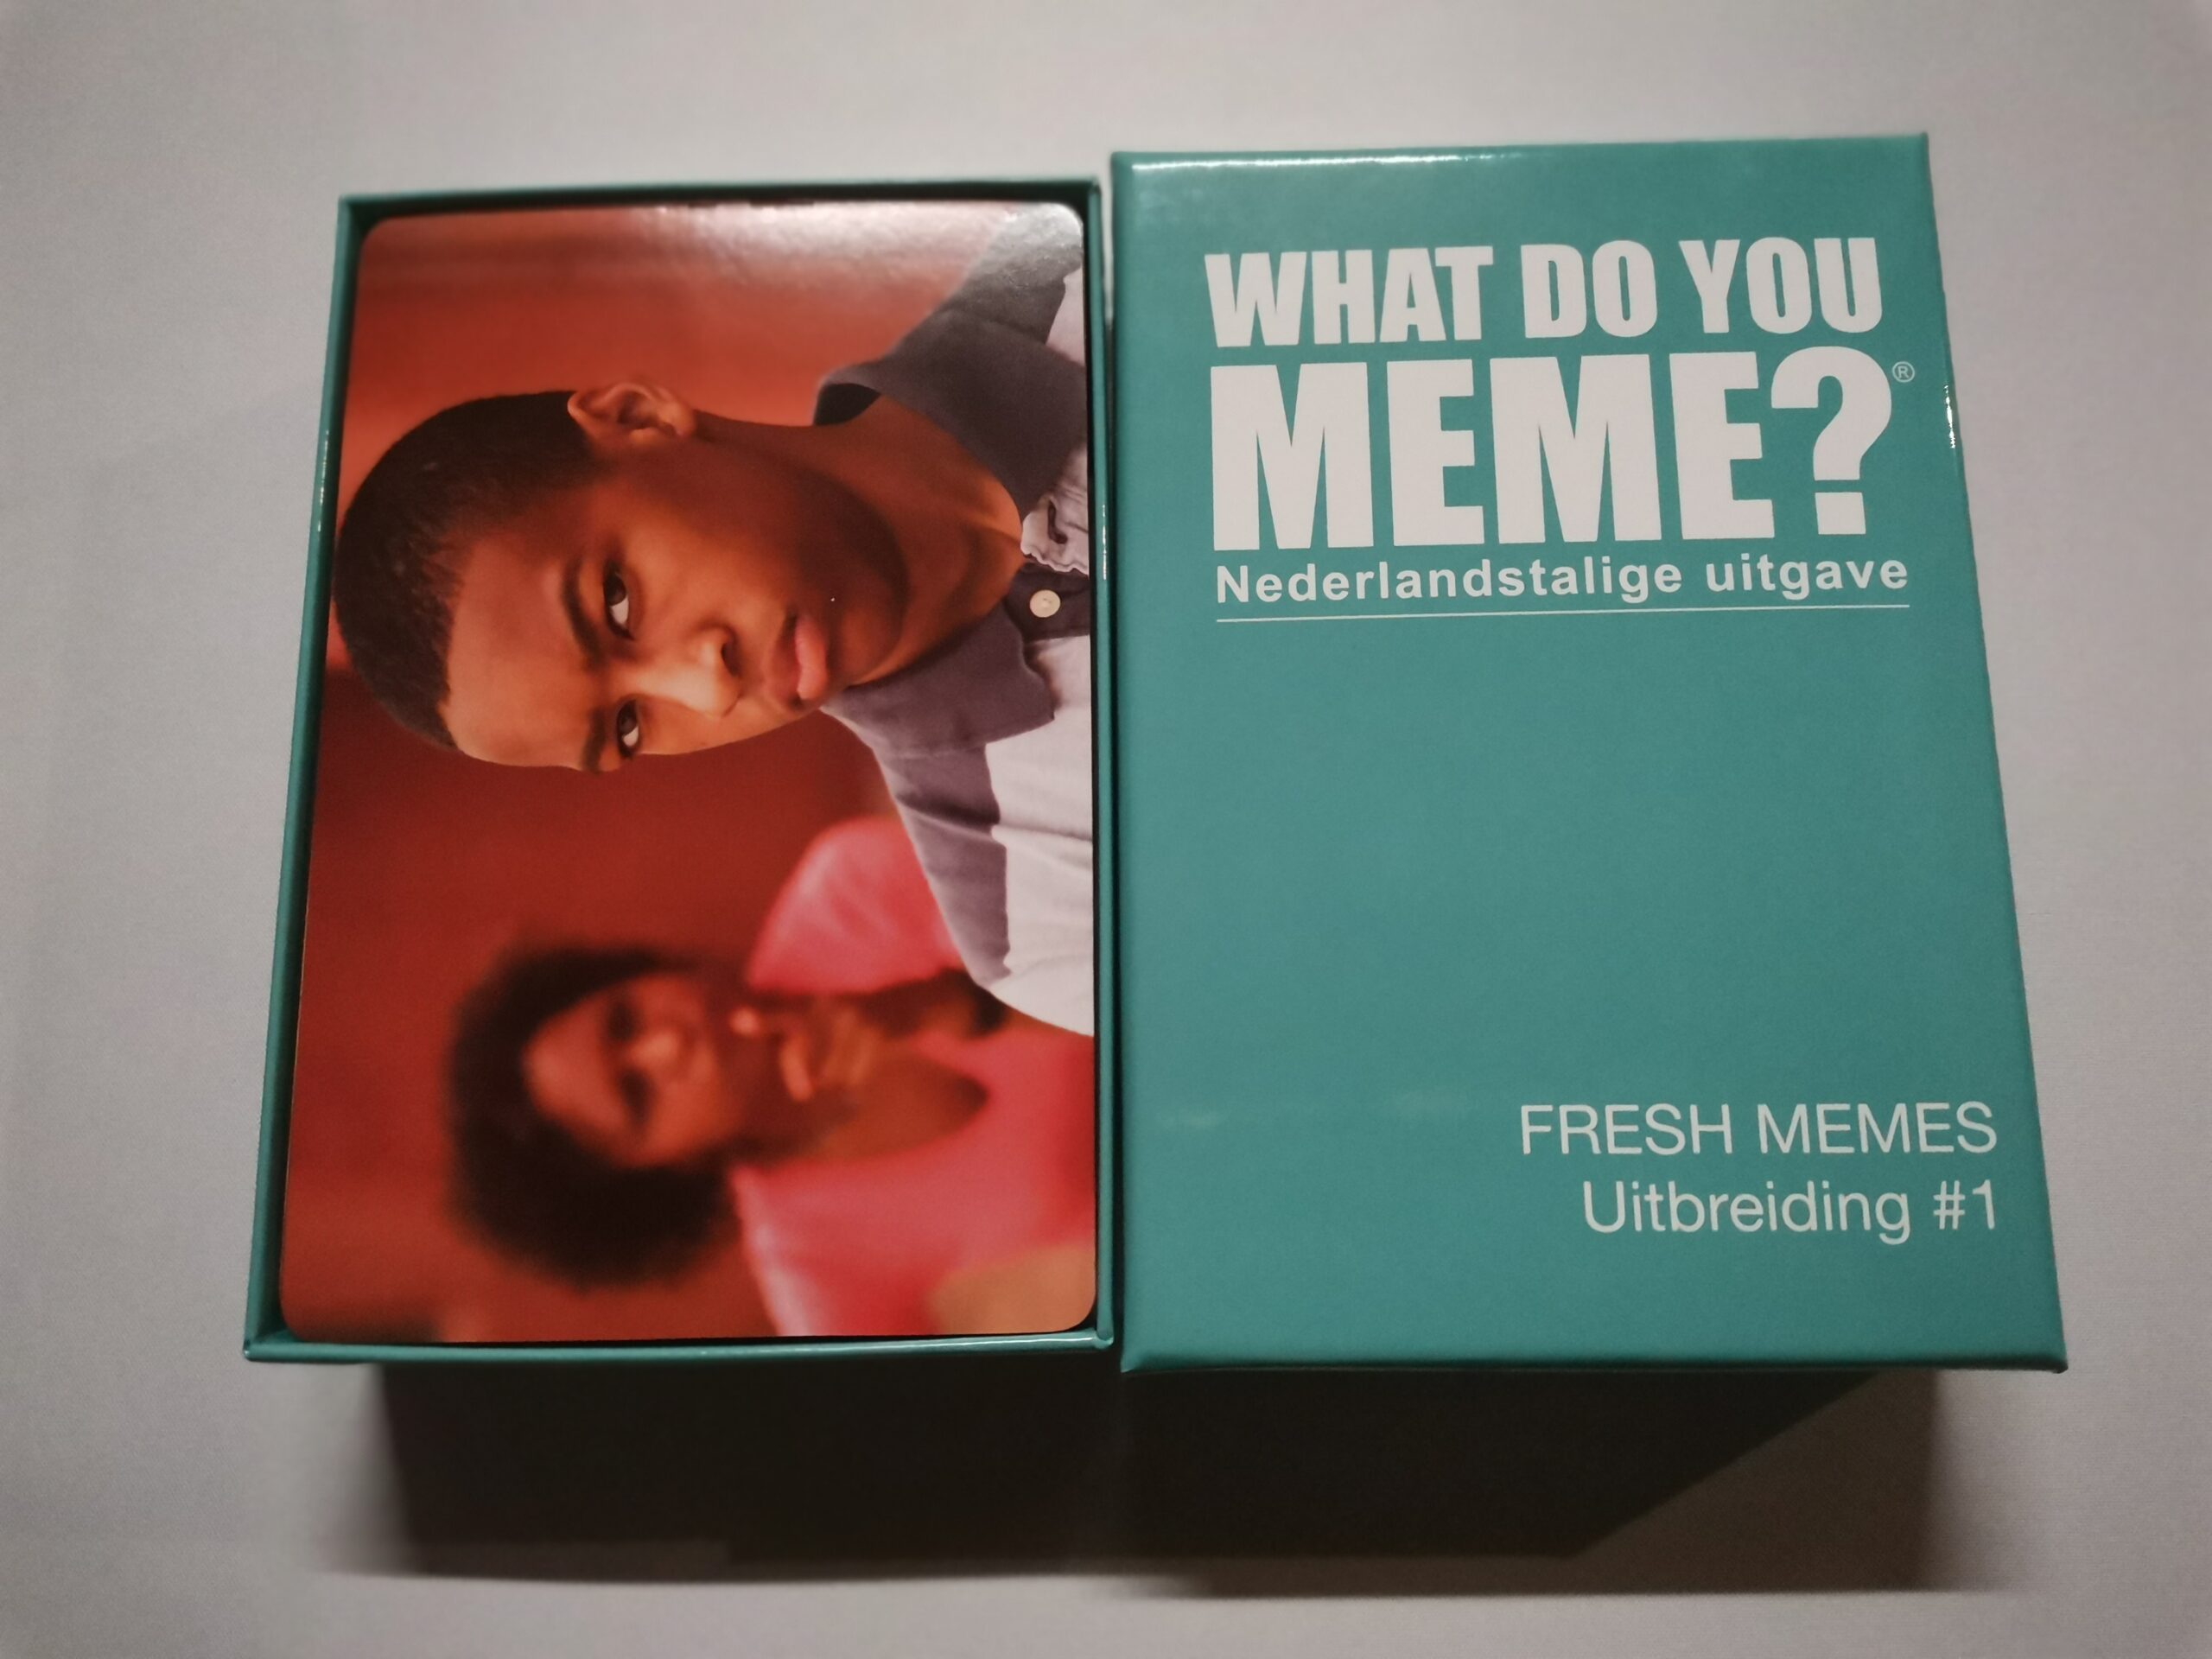 What Do You Meme? Game Expansion Pack Bundle